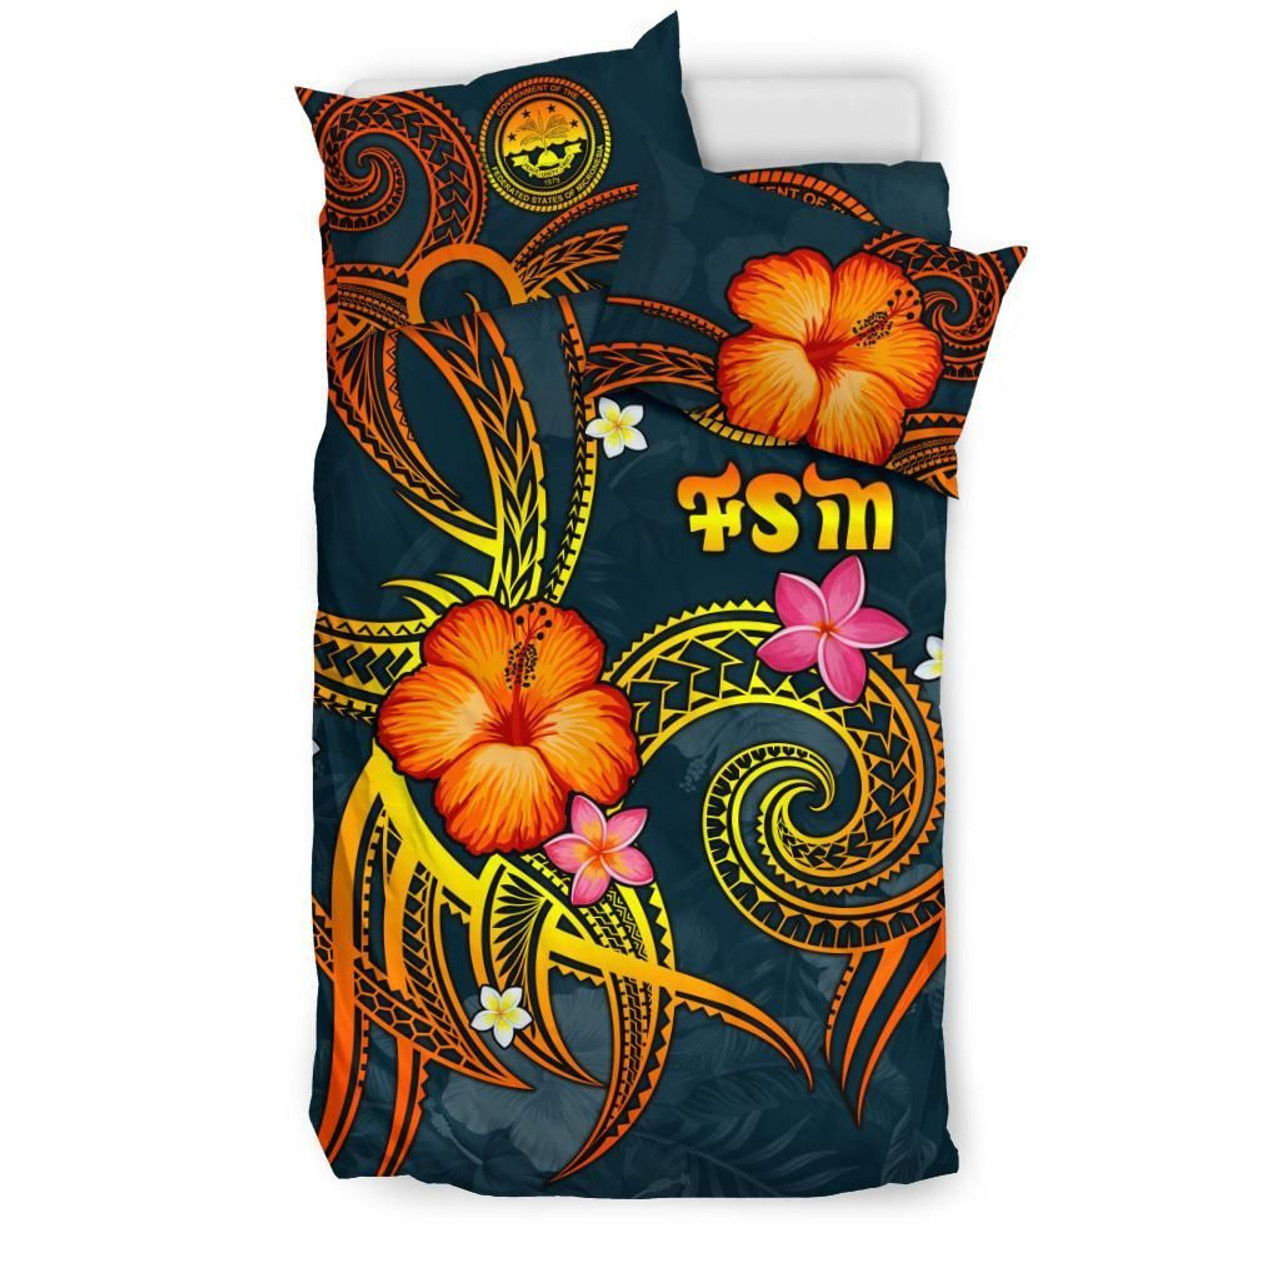 Federated States Of Micronesia Polynesian Bedding Set - Legend Of FSM (Blue) 2